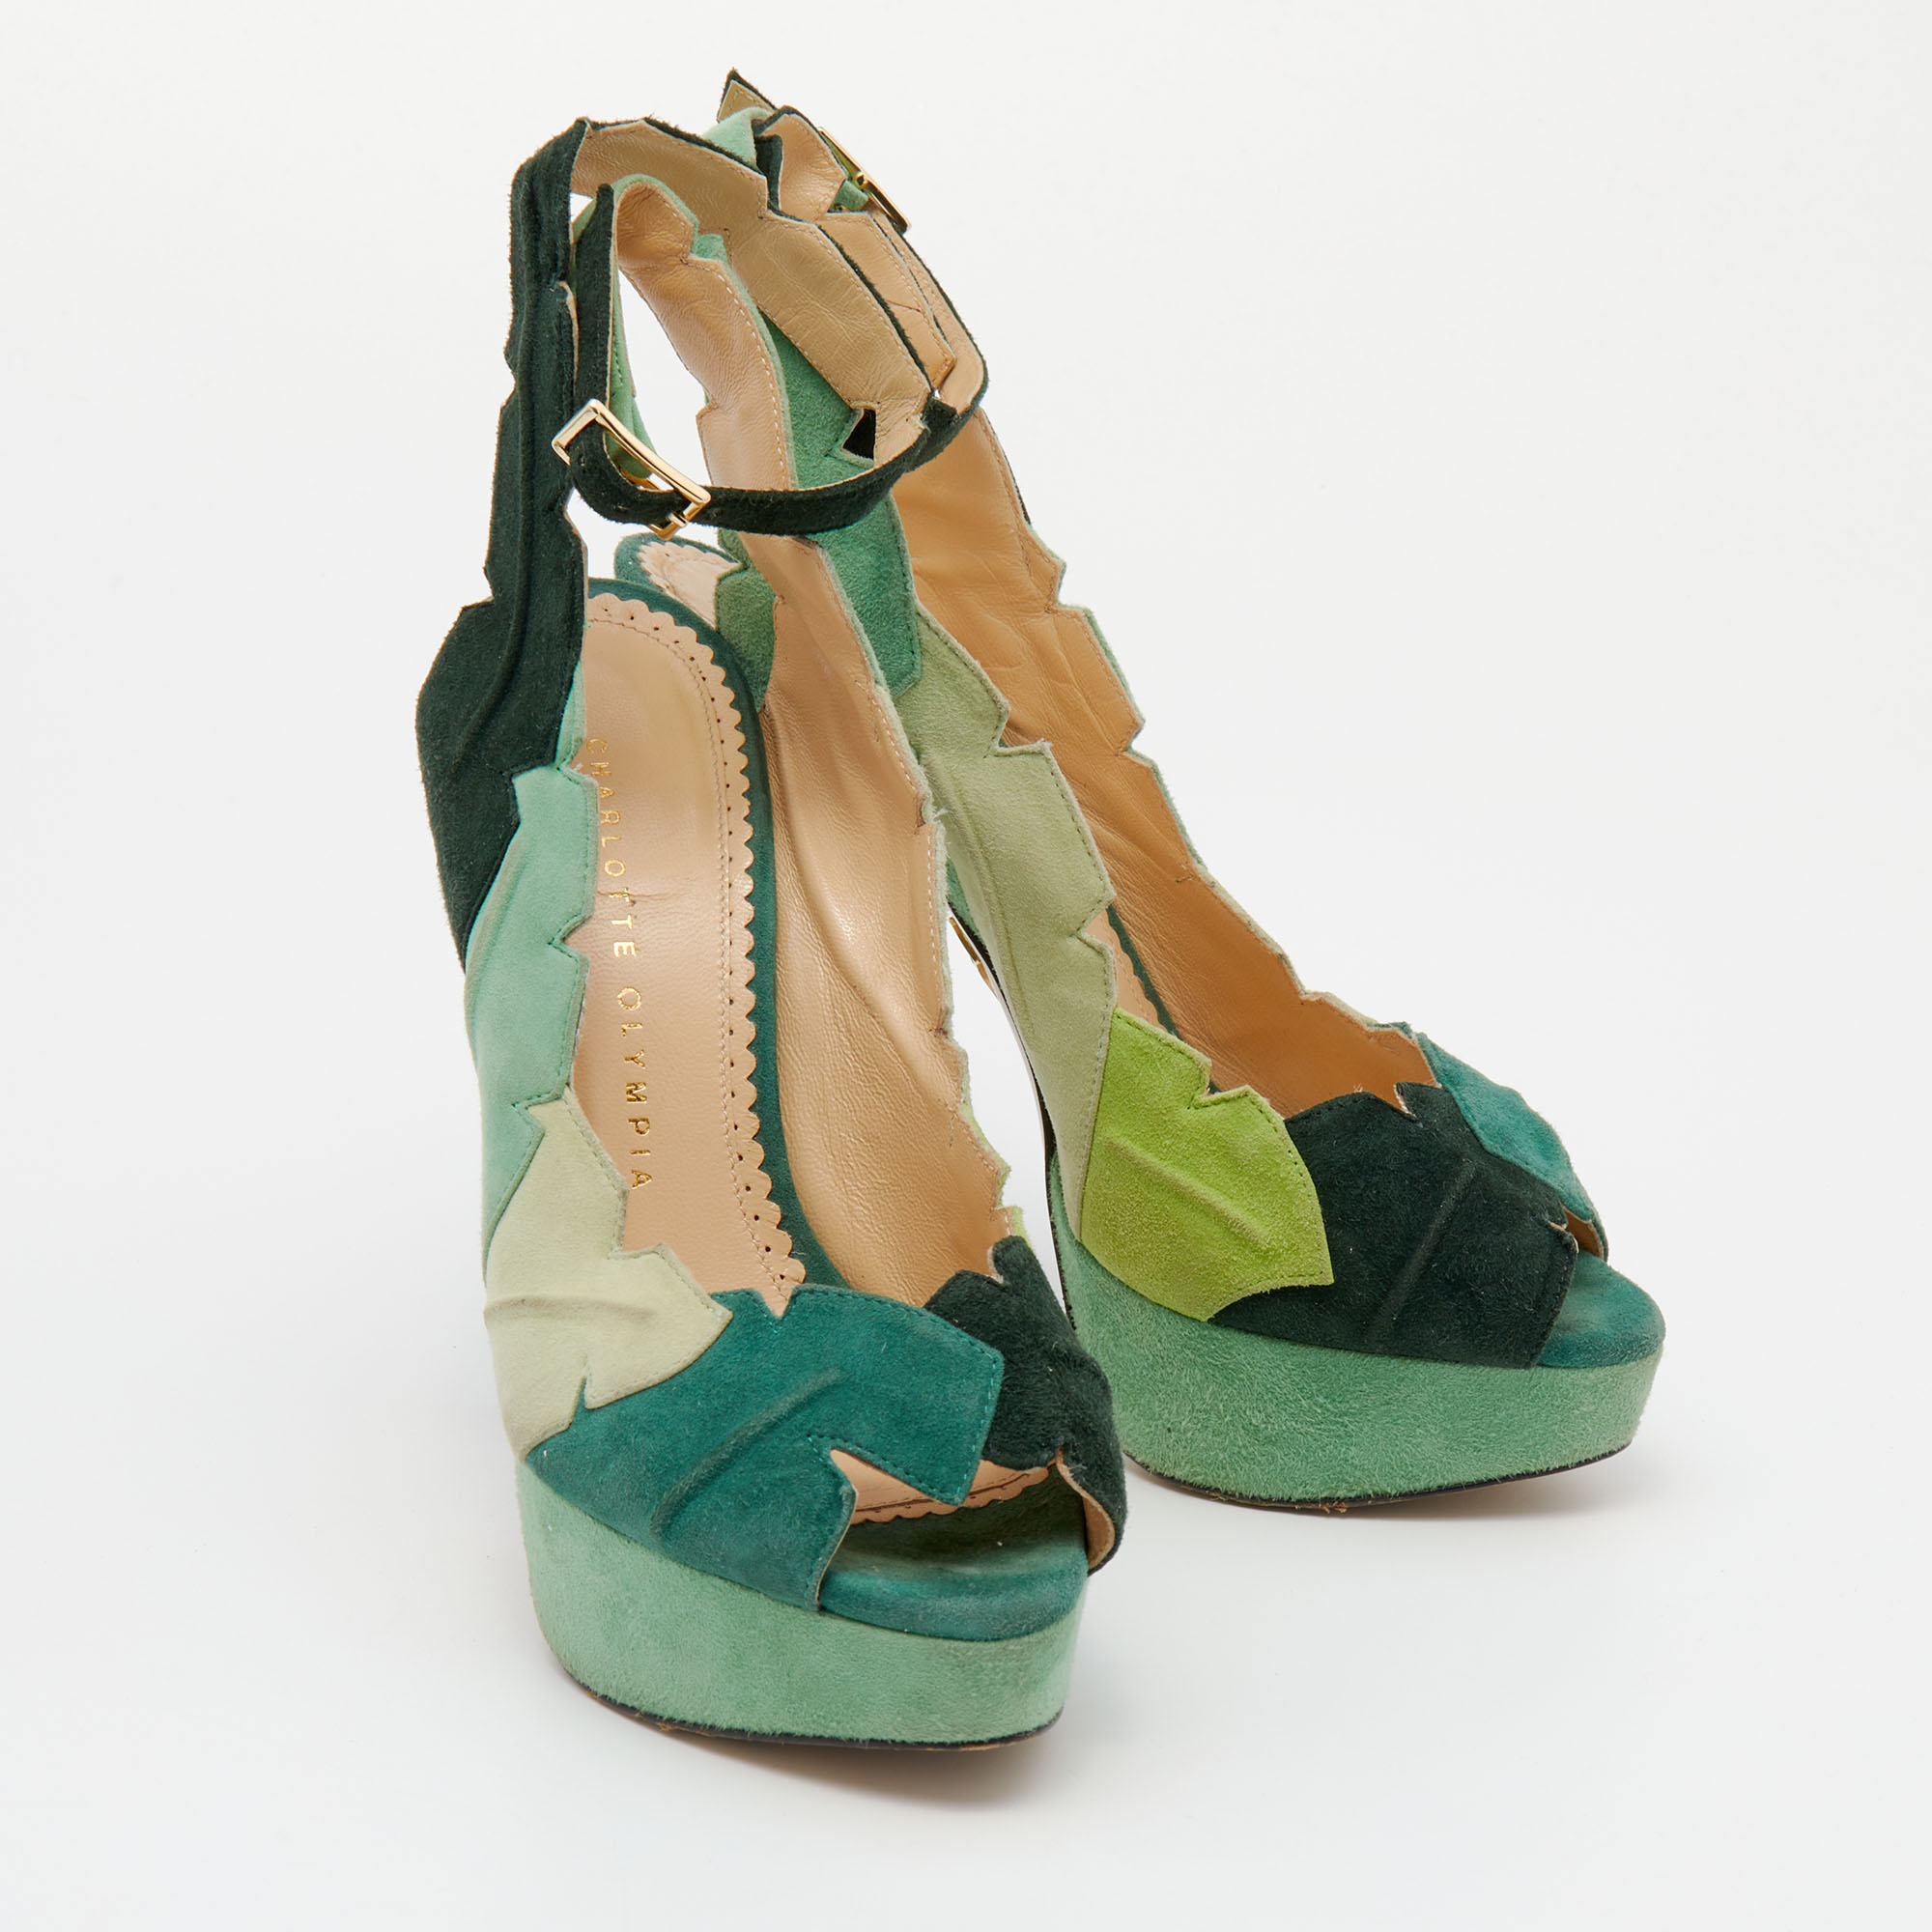 Charlotte Olympia Green Suede Platform Sandals Size 37